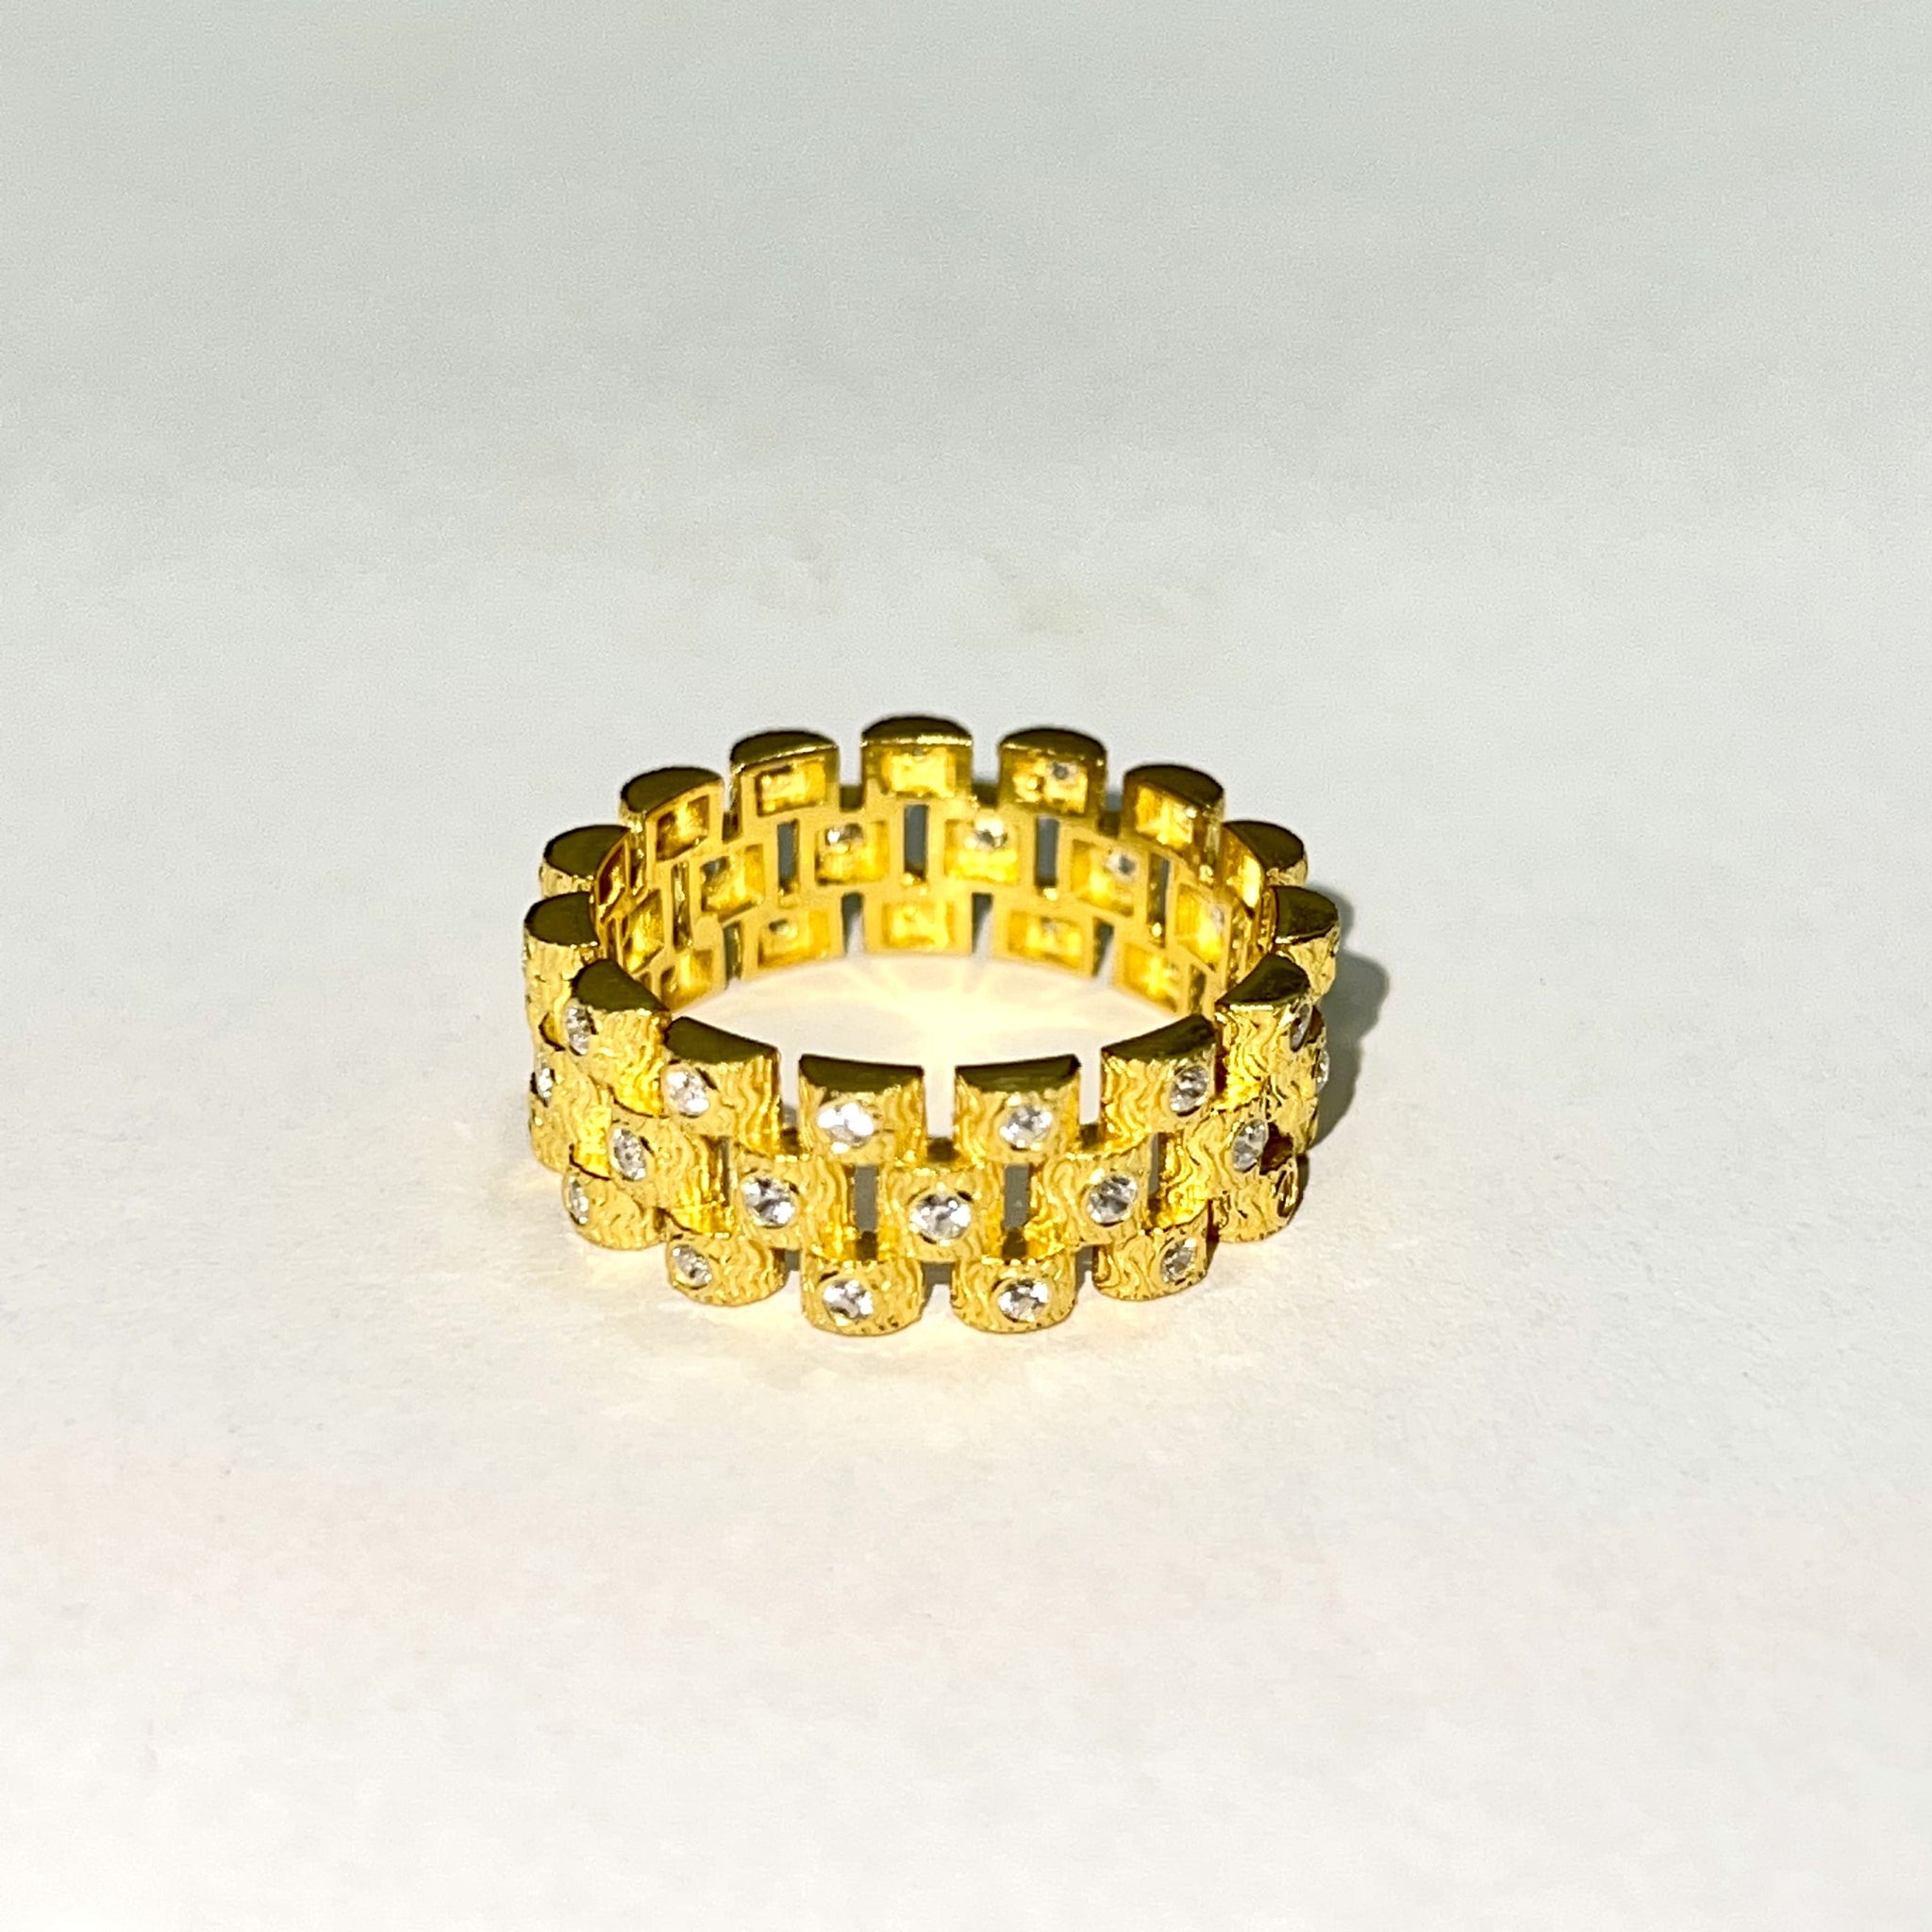 Icy Rolex-Link Ring - Zirkonia - Silver 925 gold plated